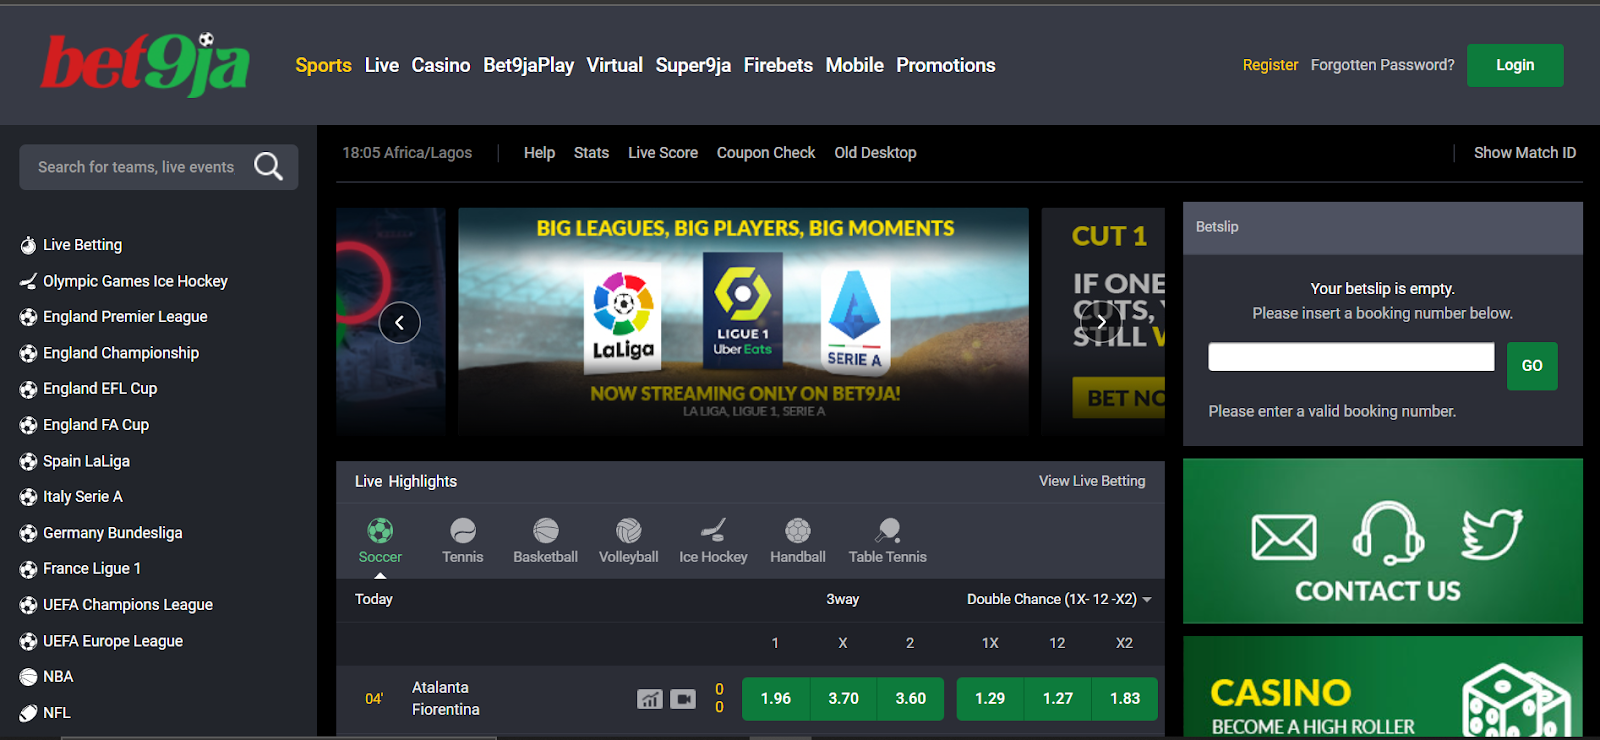 bett9ja’s homepage offering login, support and betting sports as well;